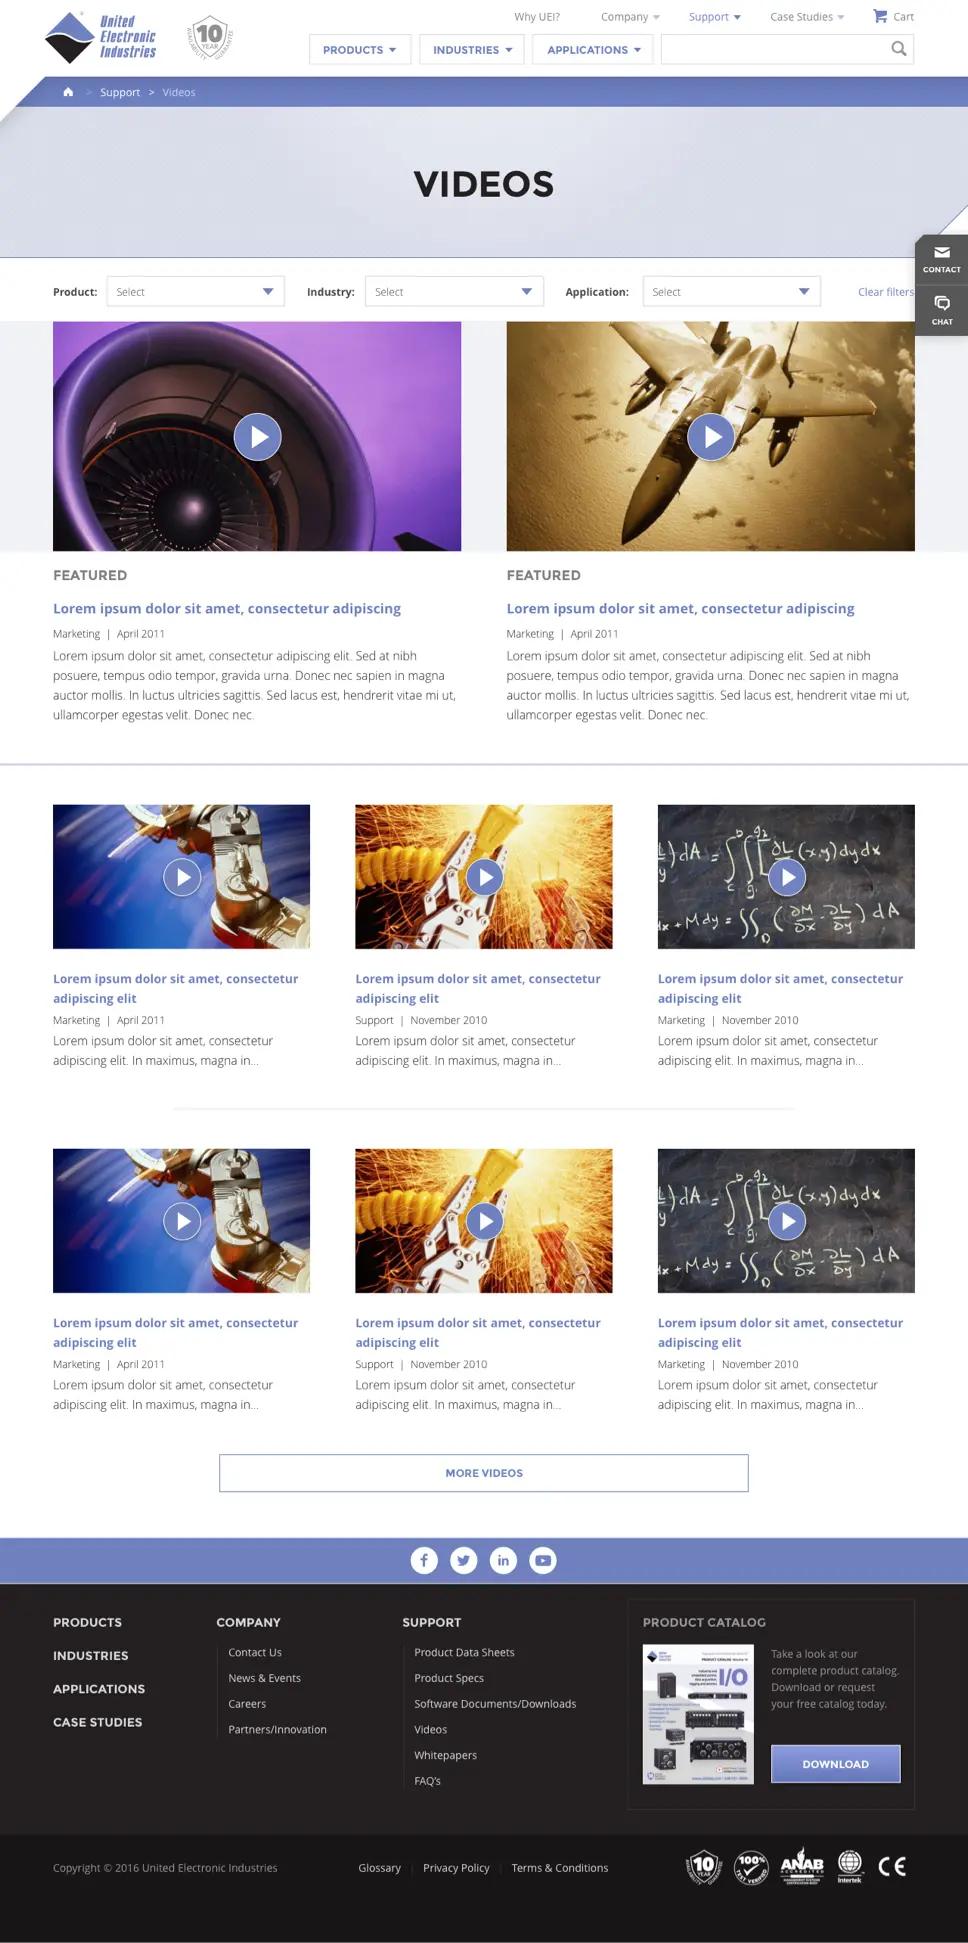 A screenshot of United Electronic Industries' "Videos" page.